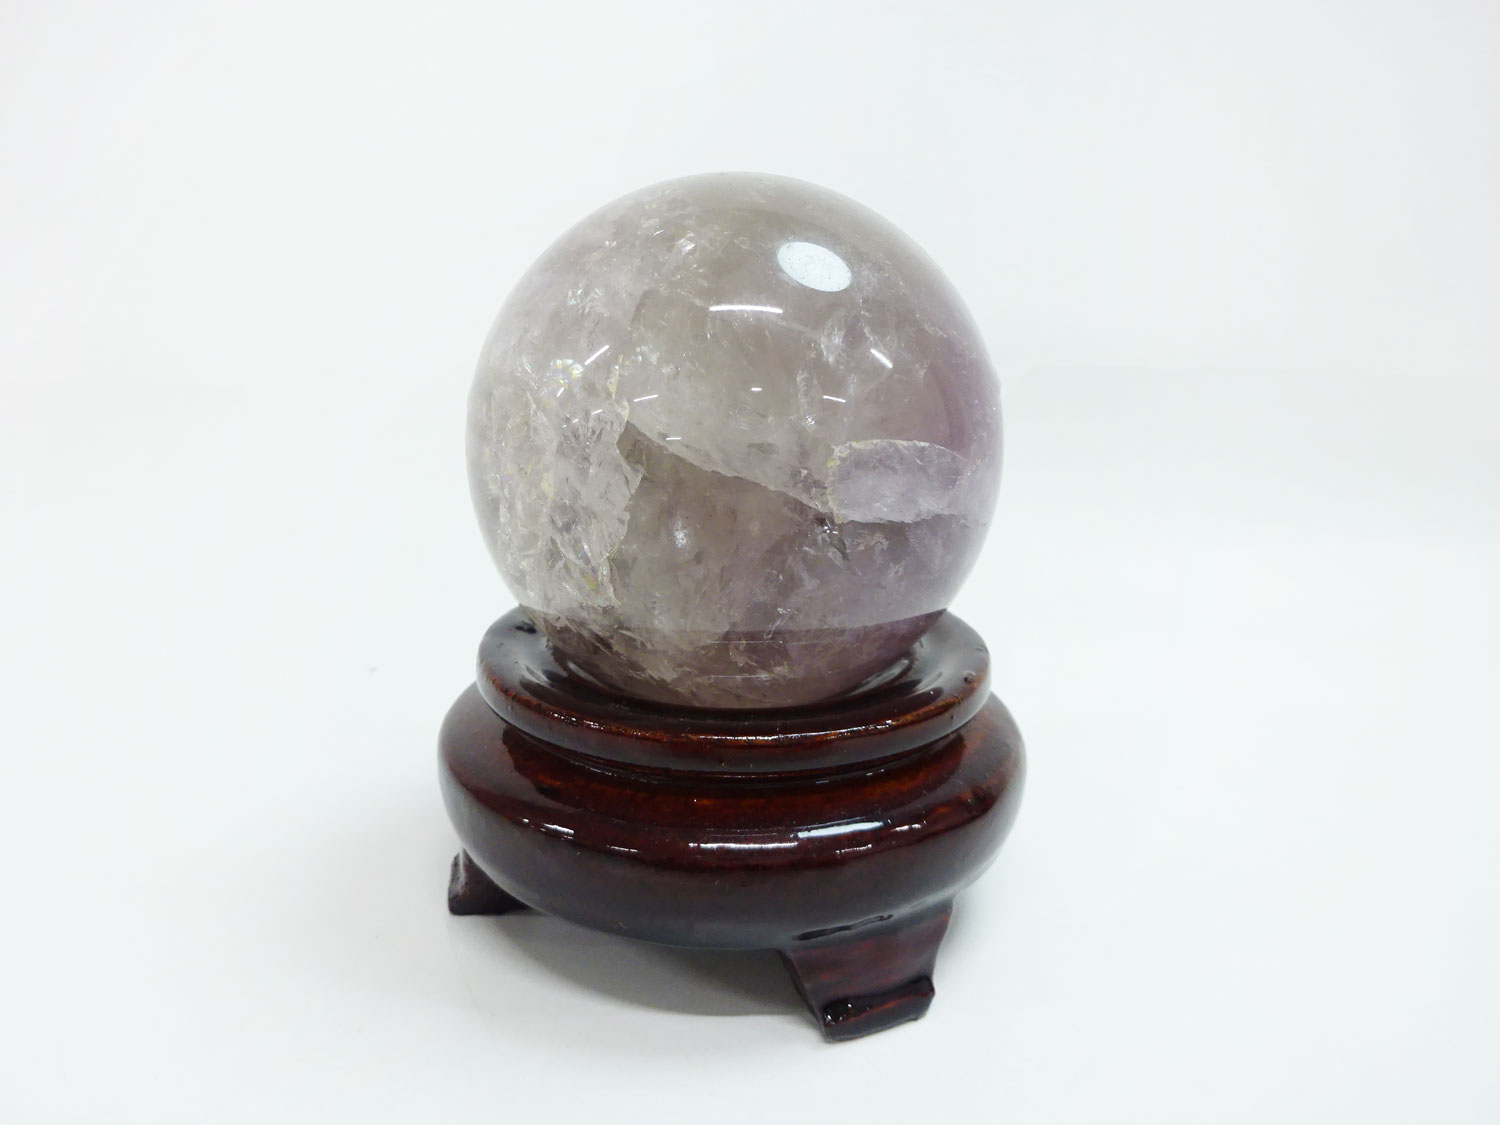 JAPANESE ORNAMENT / NATURAL CRYSTAL & MINERAL (314.53g) / HEALING CRYSTAL SPHERE